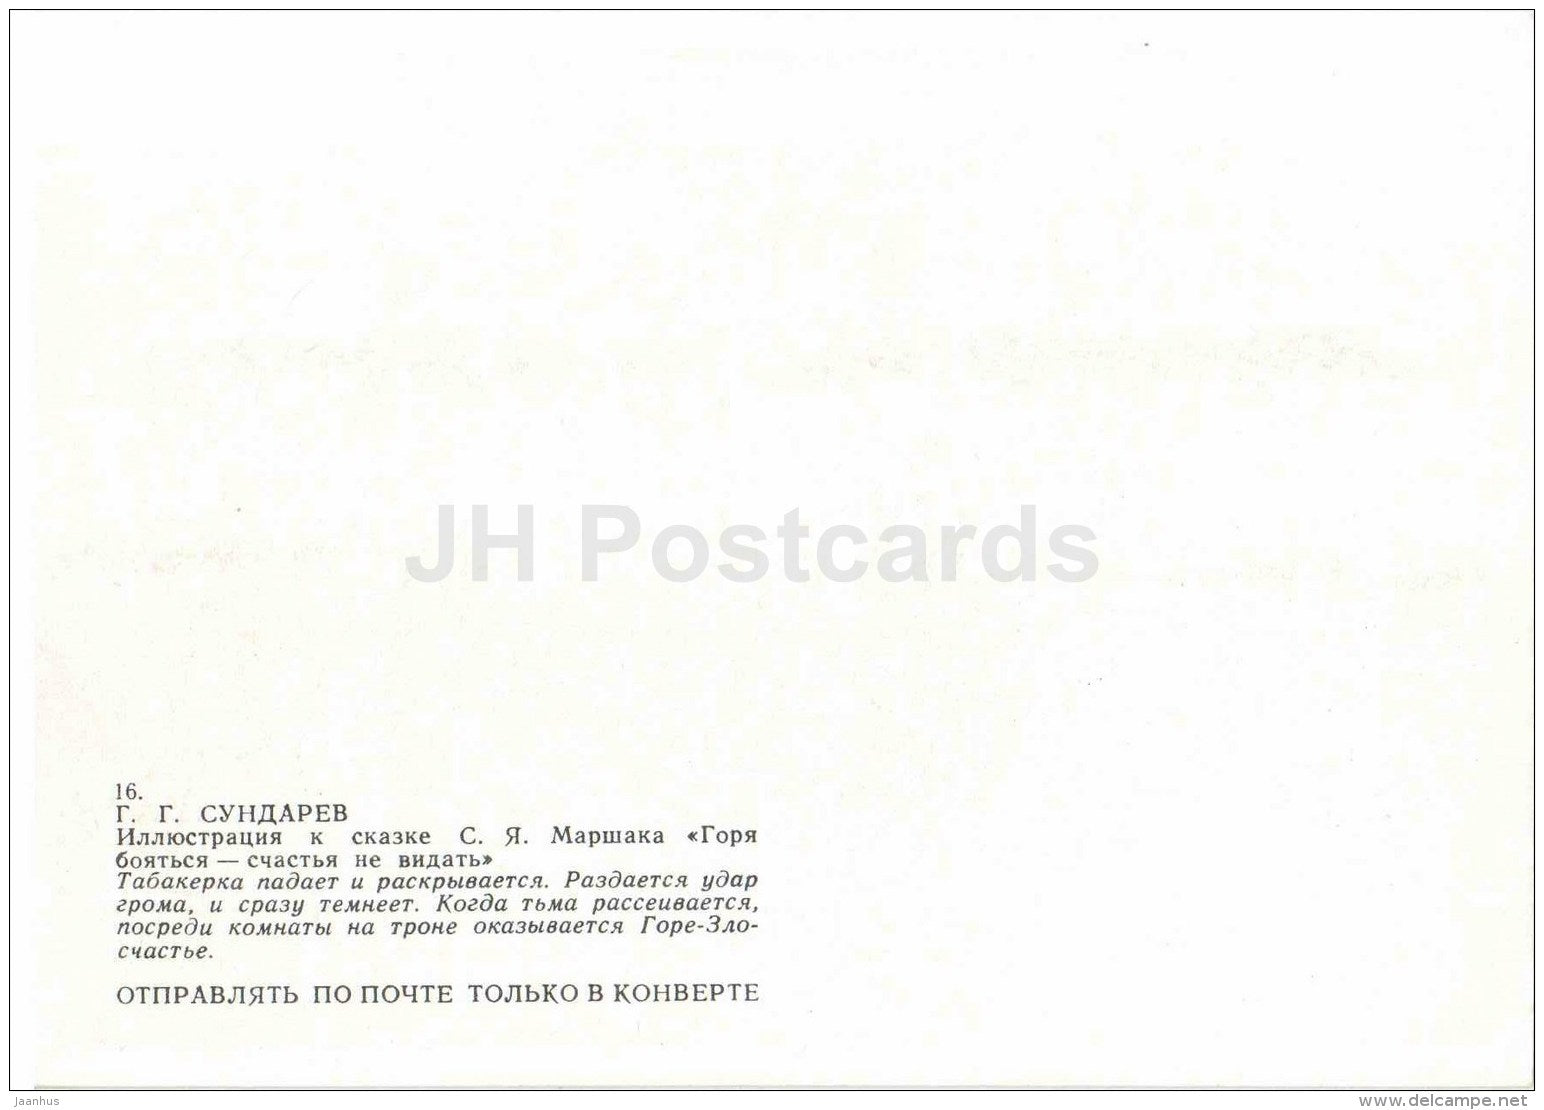 witch - Afraid of Troubles , Cannot Have Luck - russian fairy tale by S. Marshak - 1985 - Russia USSR - unused - JH Postcards